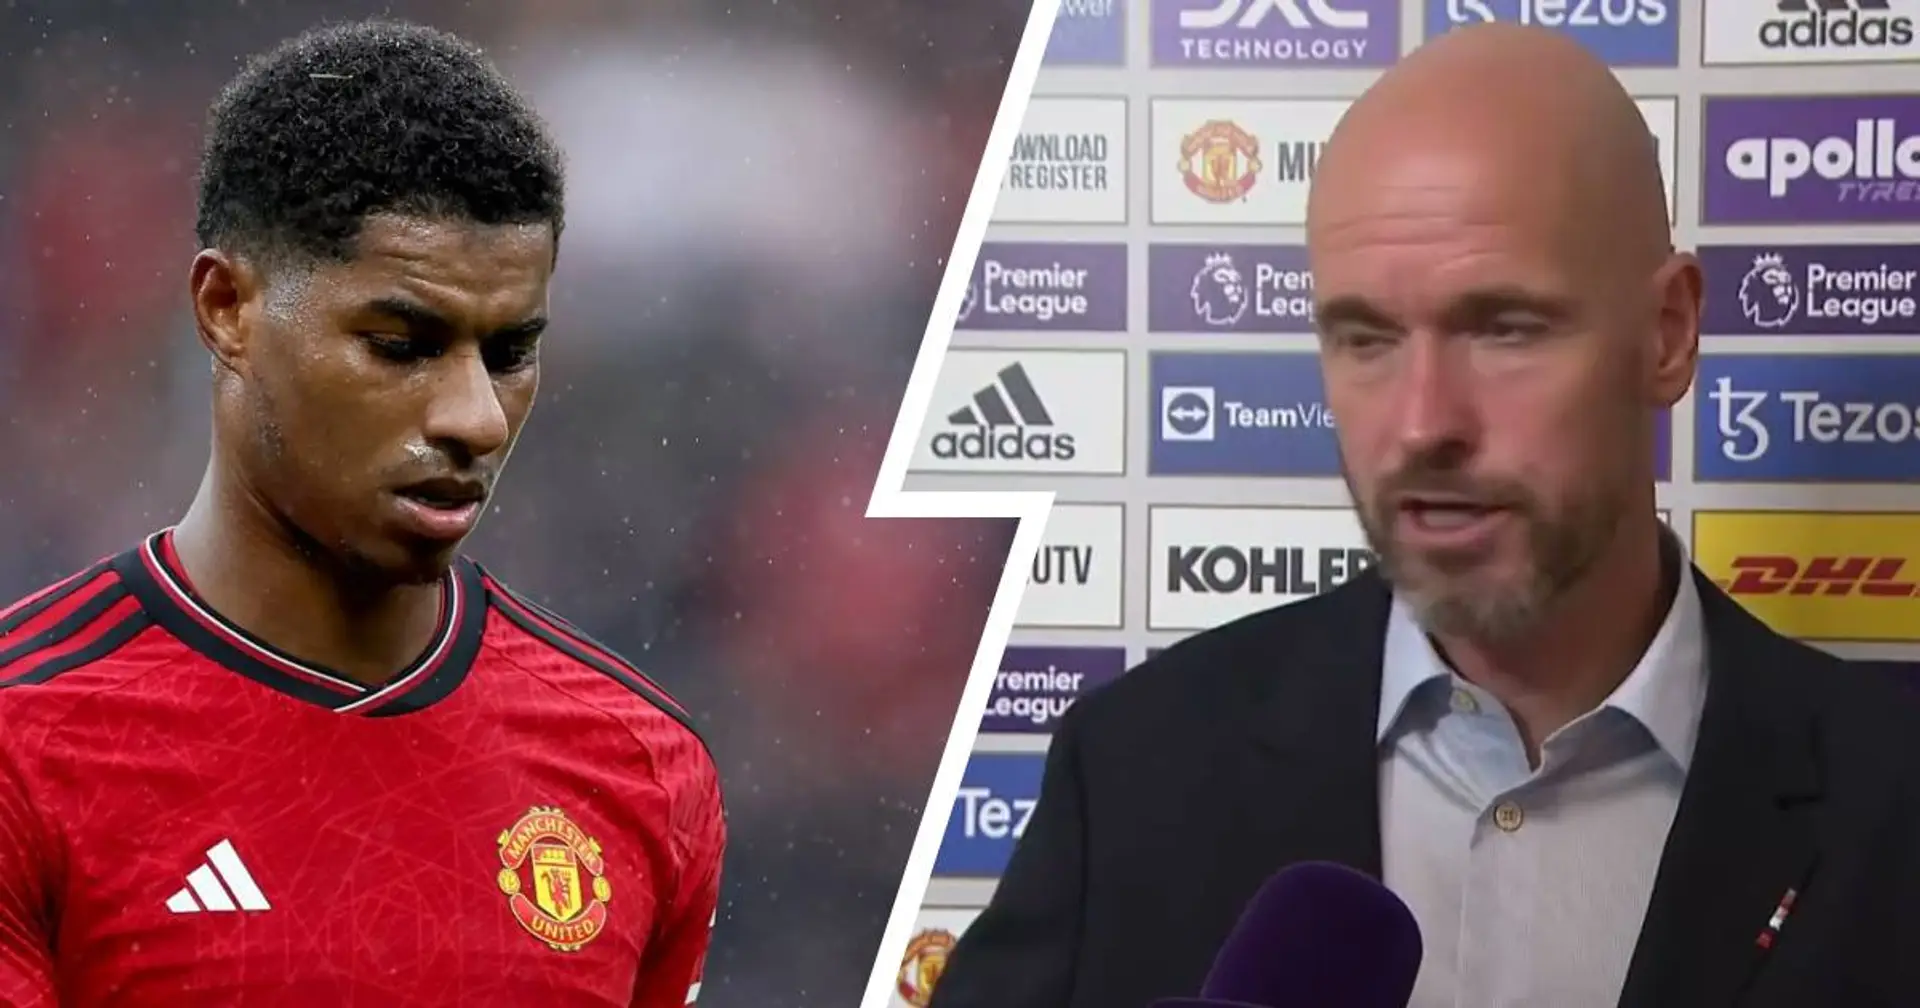 Ten Hag on Rashford: 'You have to be more determined to score a goal'